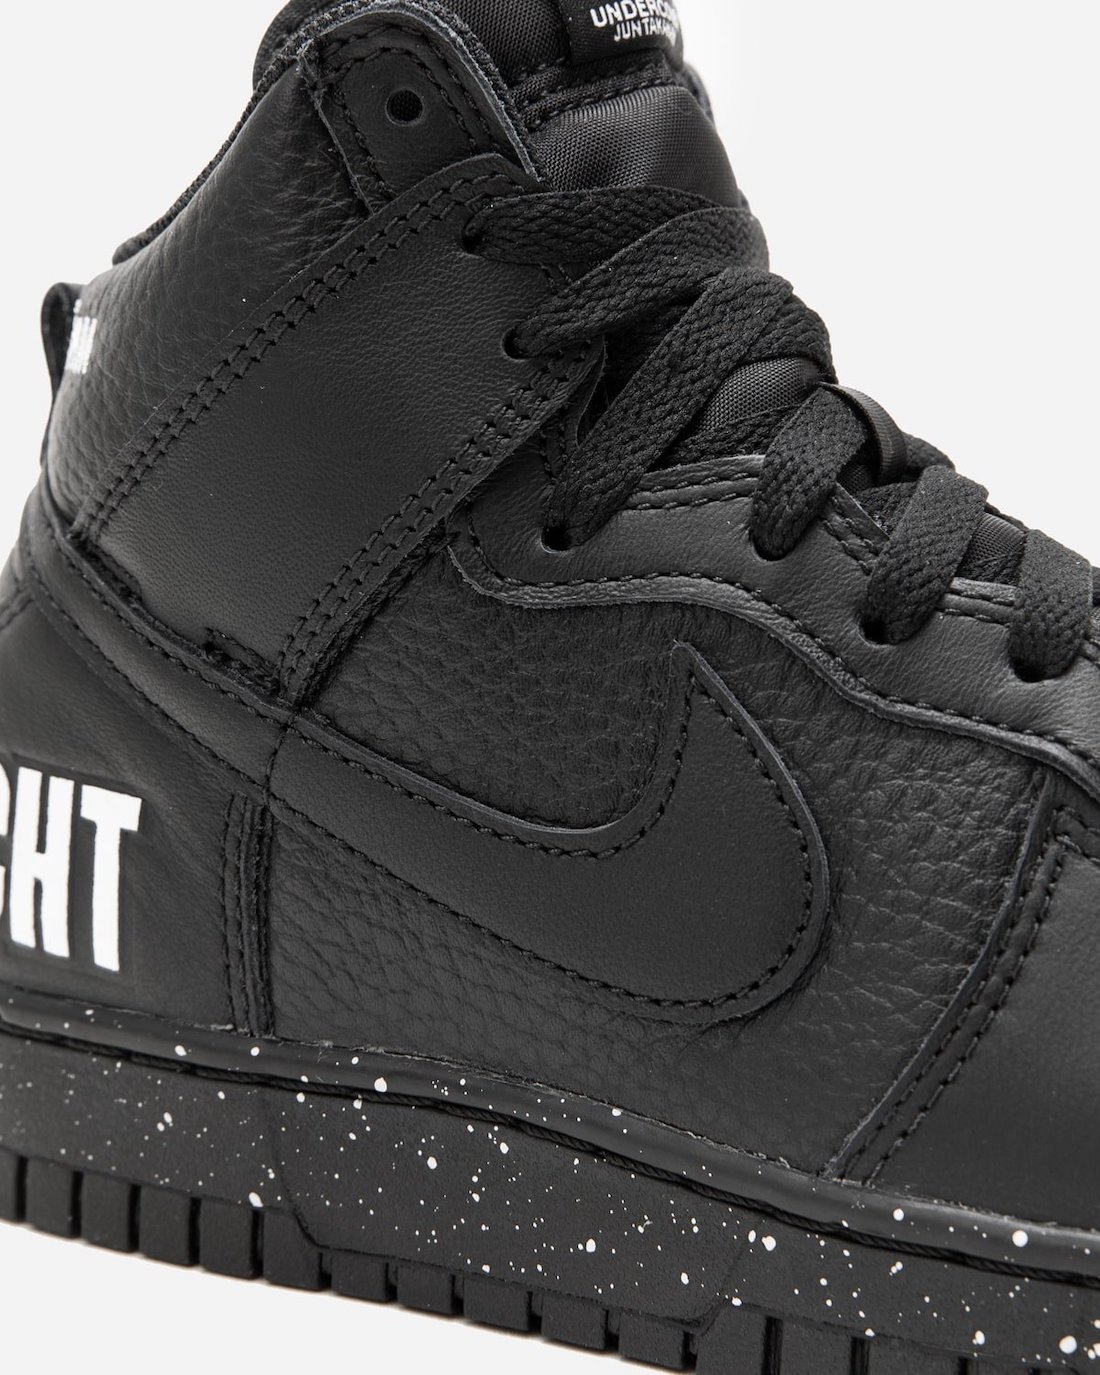 Undercover Nike Dunk High Chaos Release Date